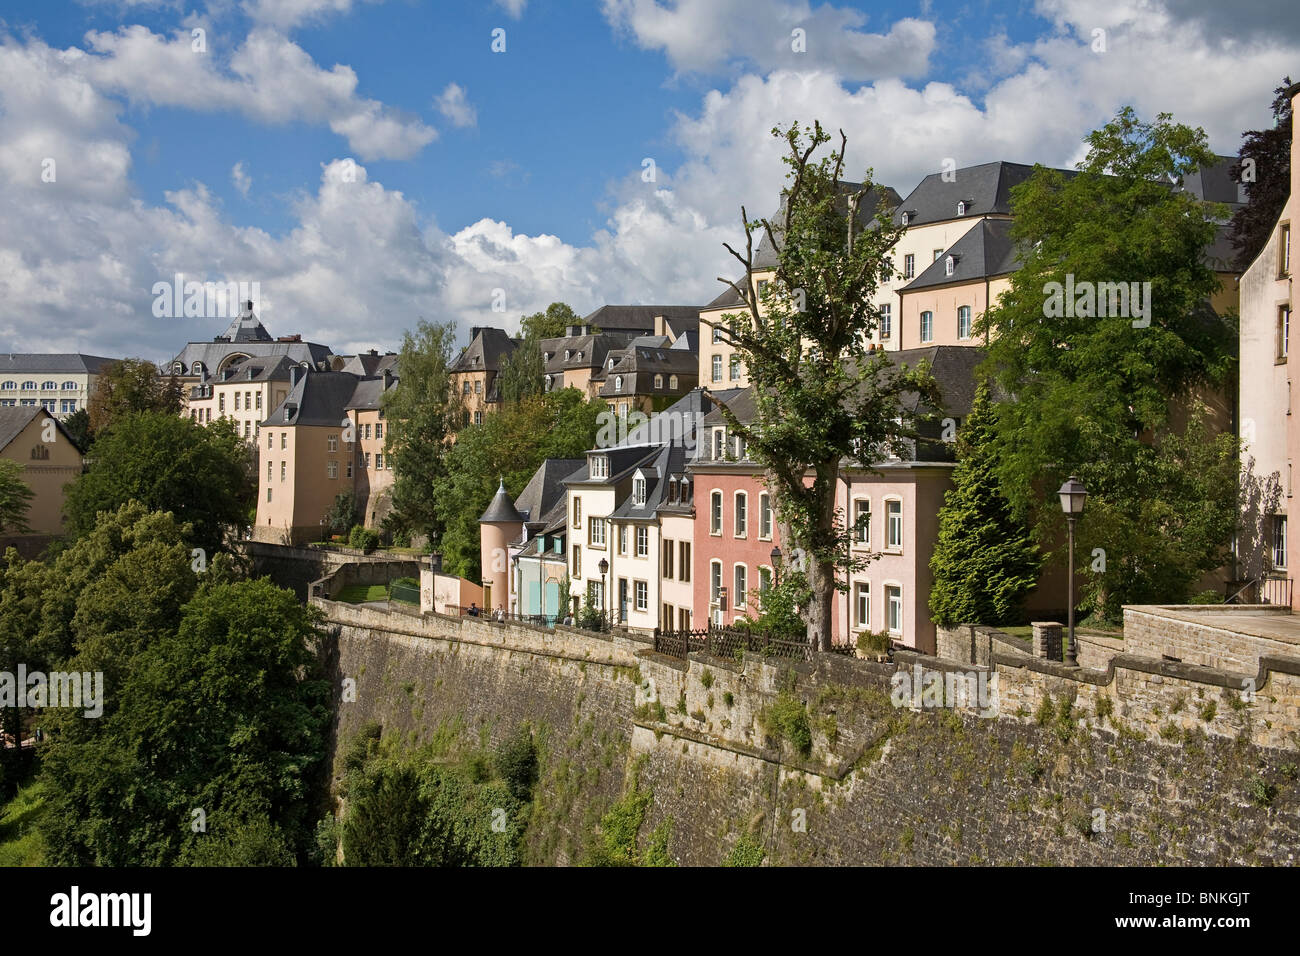 Luxembourg ; Looking across to the Old City ; View of the Corniche ; July 2OO8 Stock Photo